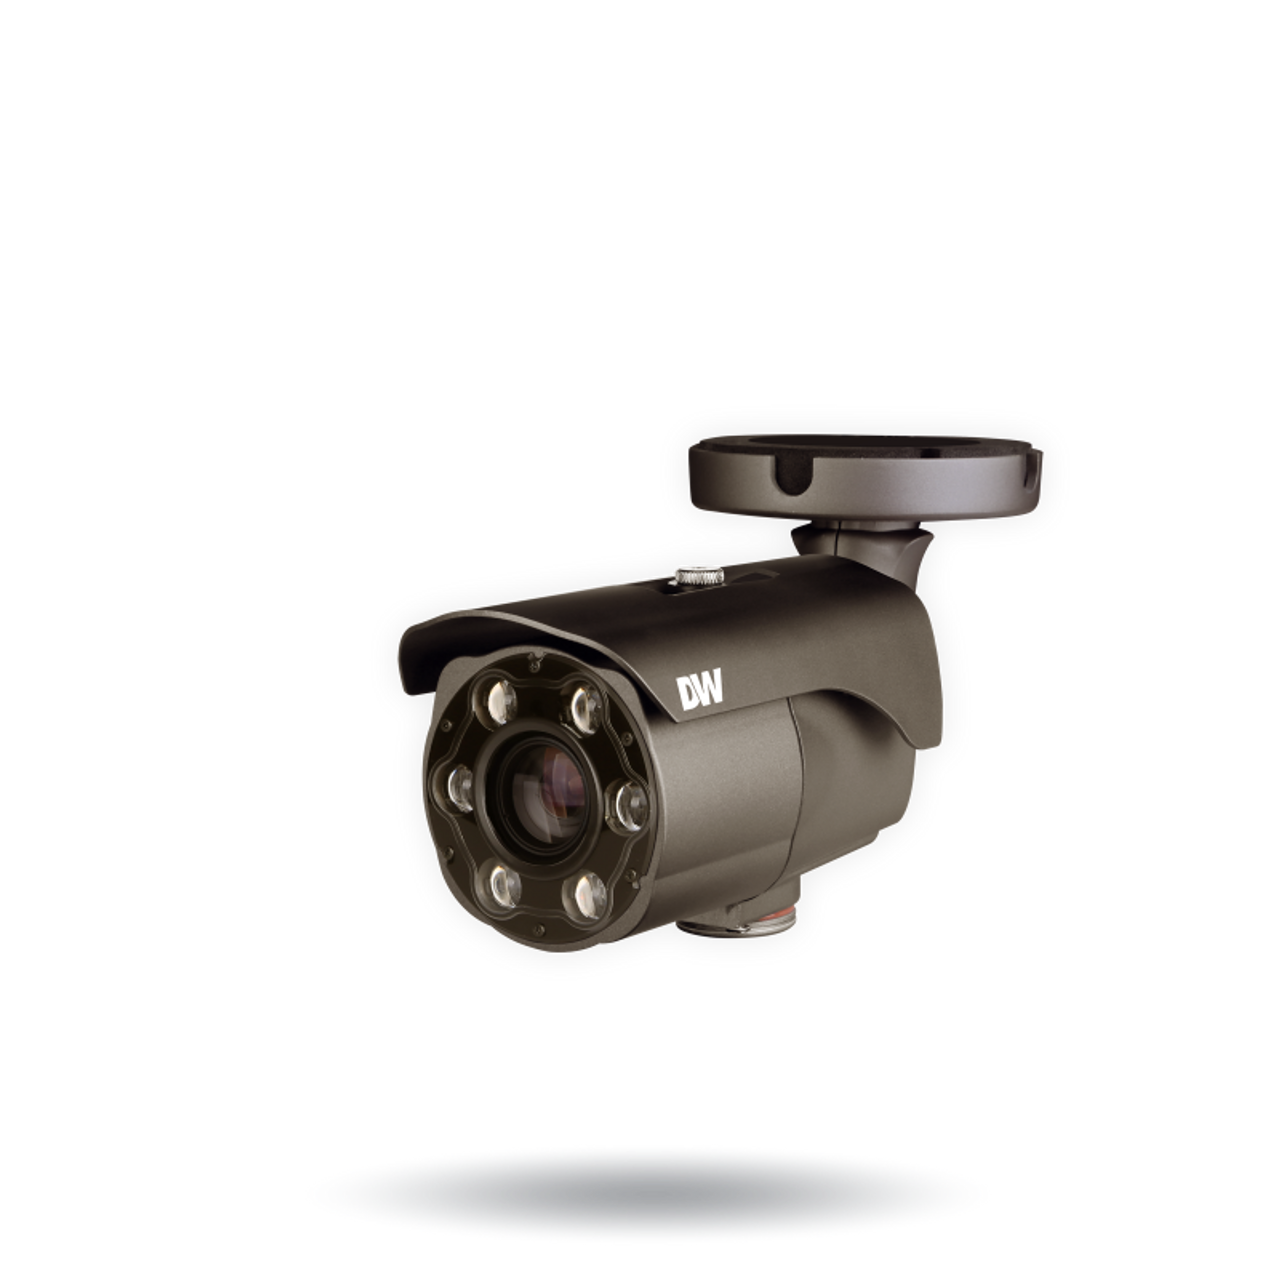 Digital Watchdog DWC-MB44Wi650C1 4MP Night Vision Outdoor All-in-One Bullet IP Security Camera with 6~50mm lens, 128GB Storage